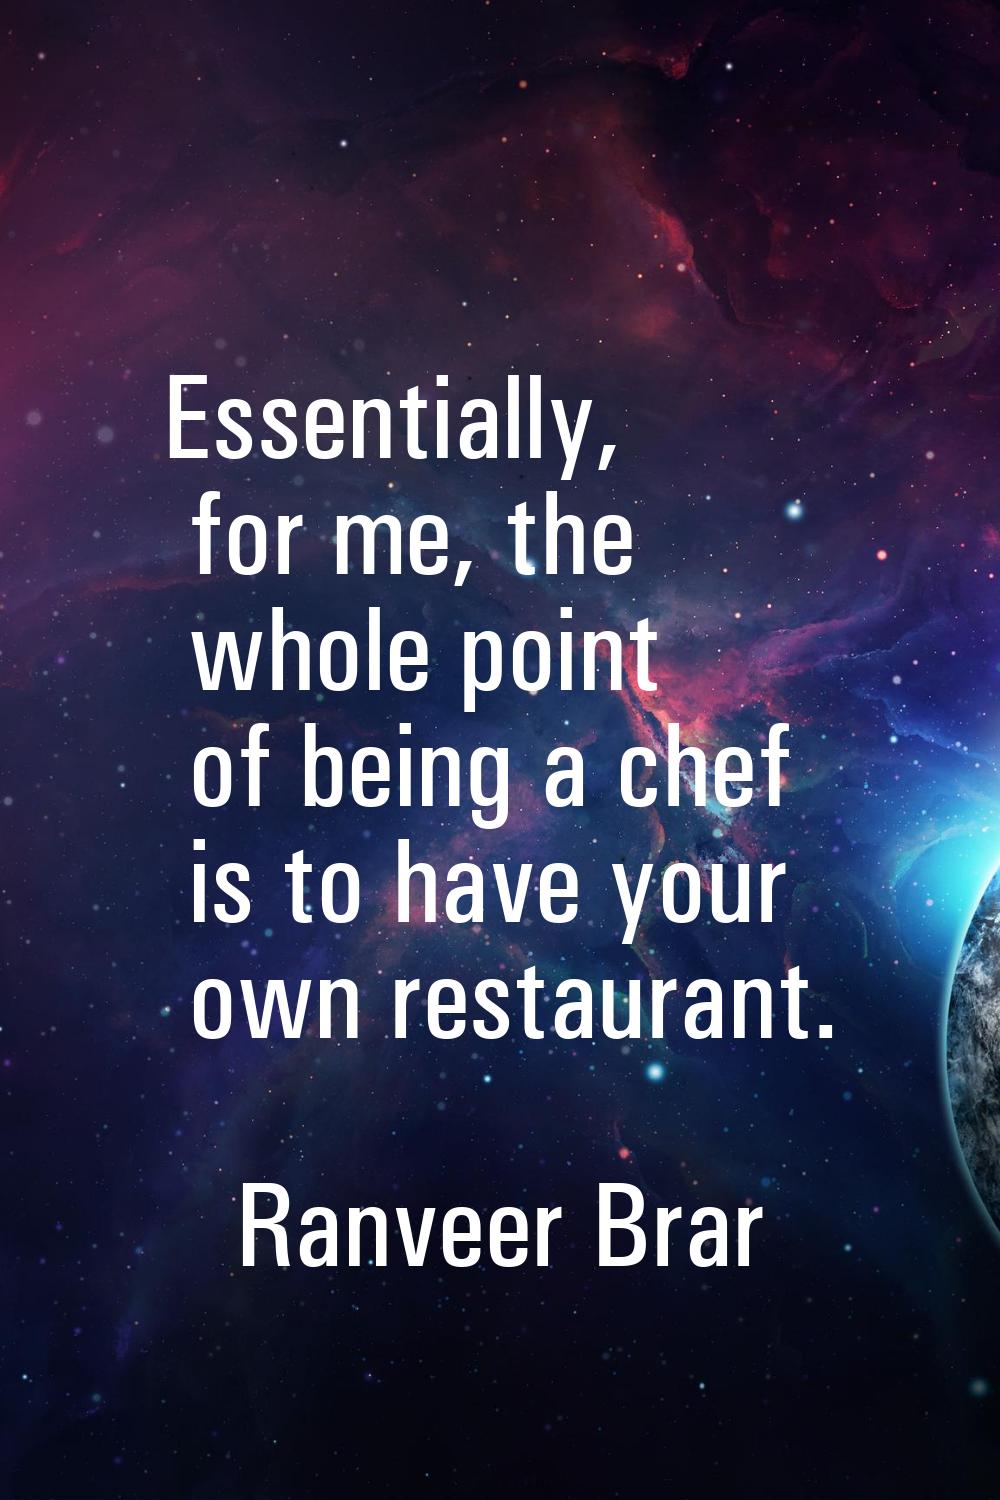 Essentially, for me, the whole point of being a chef is to have your own restaurant.